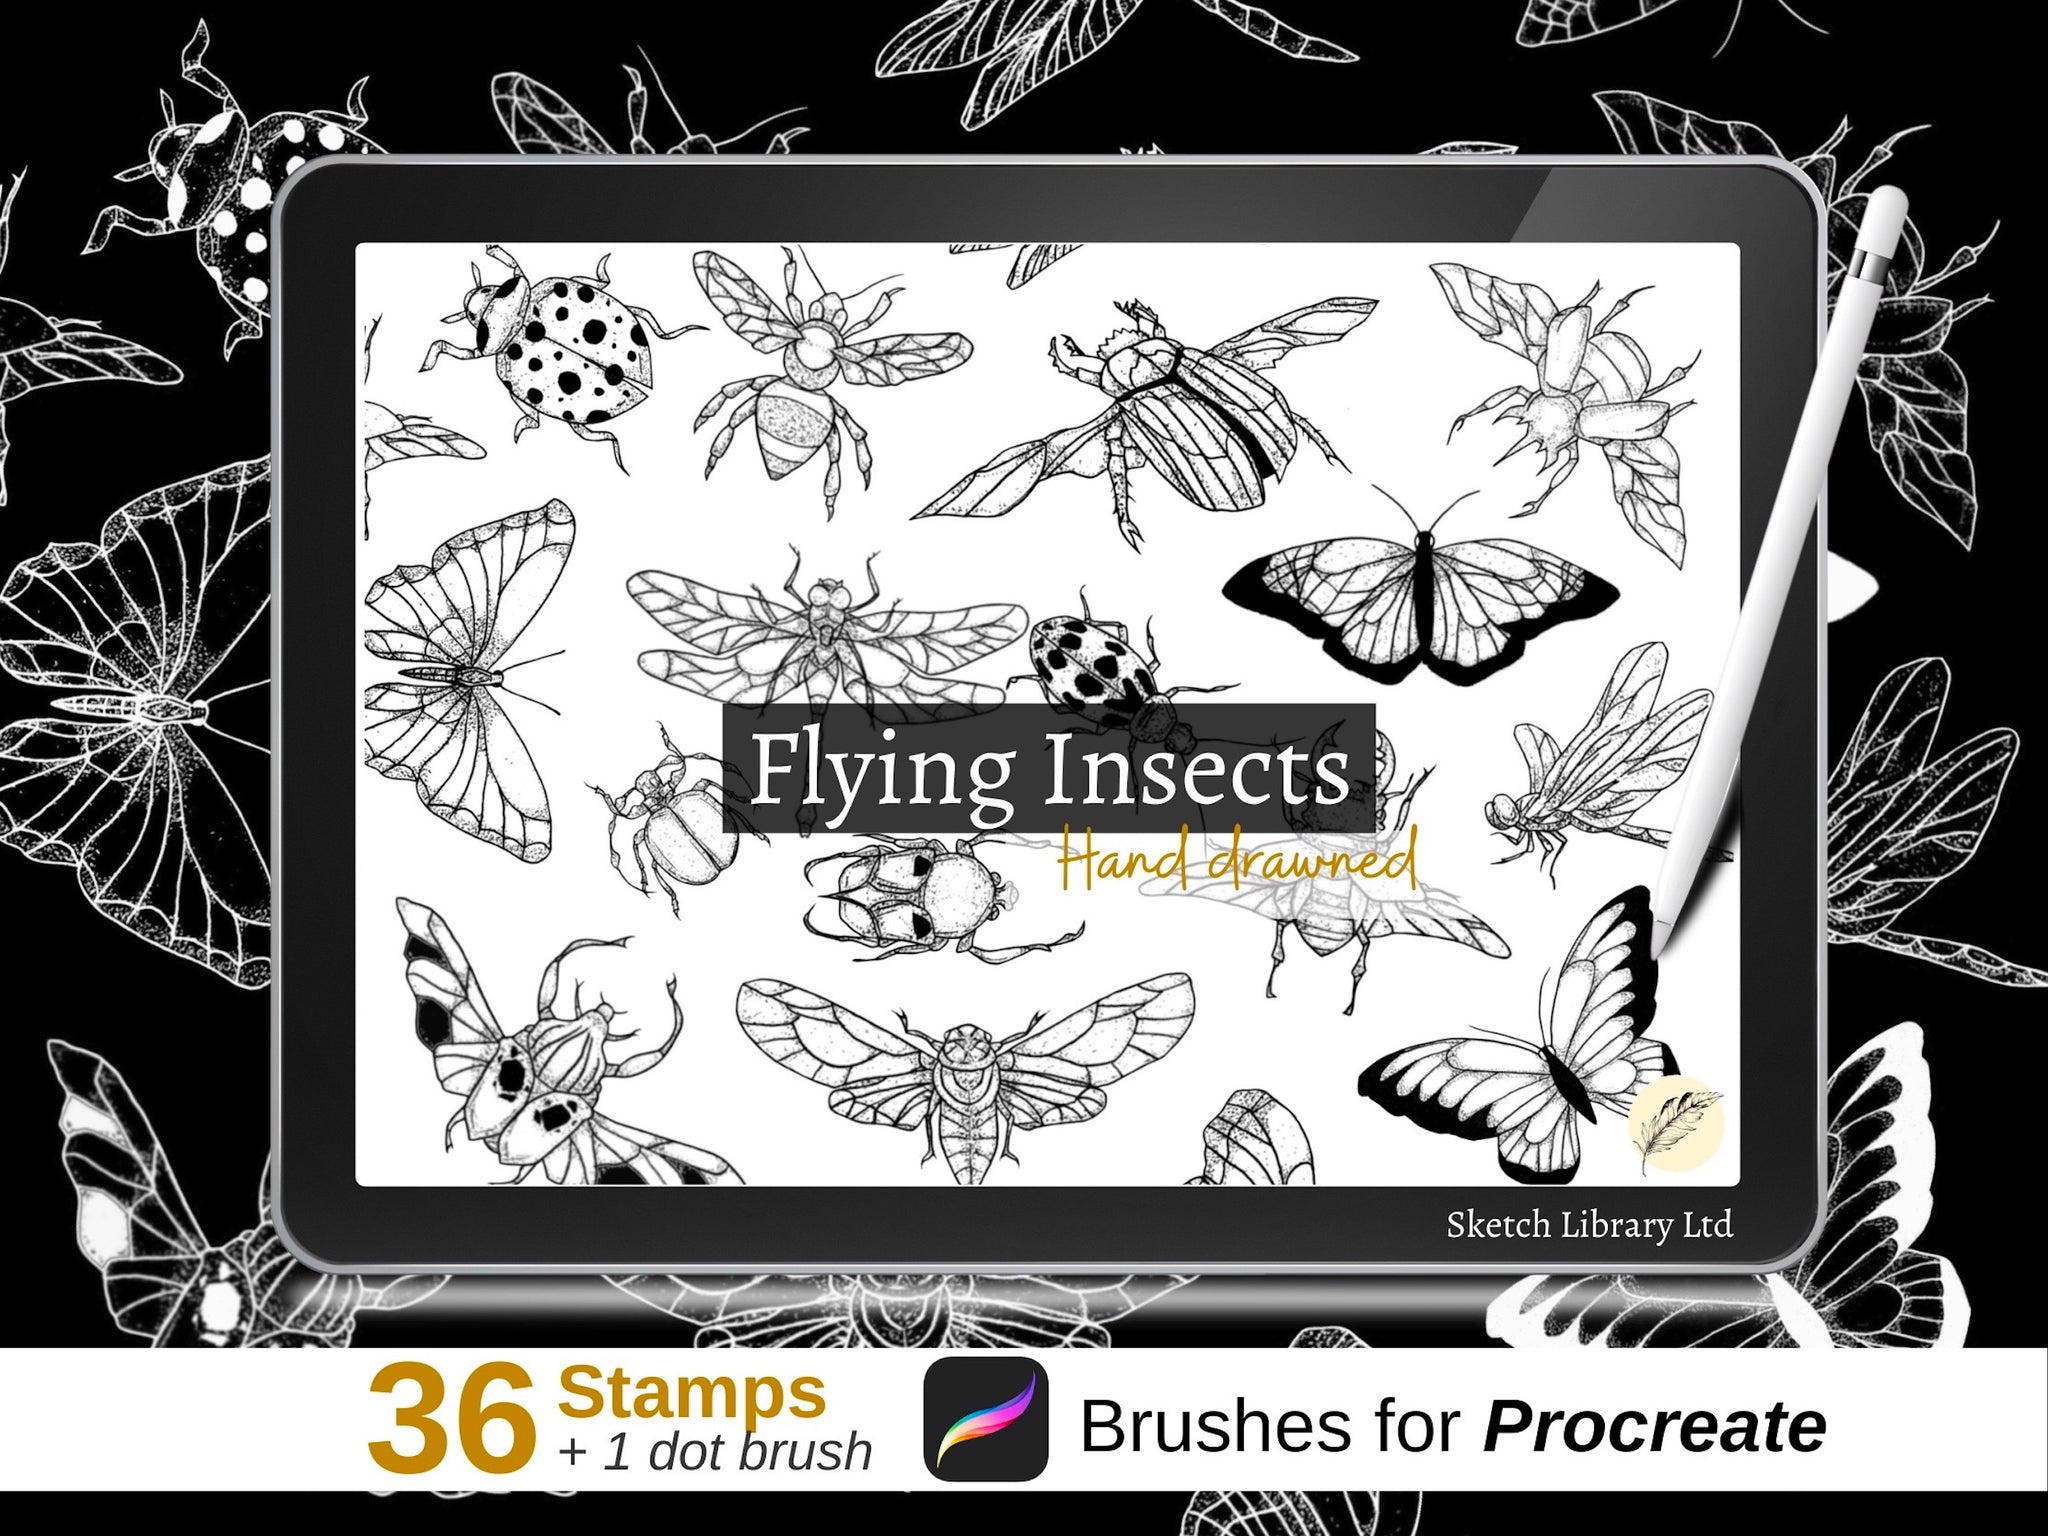 Flying insects tattoo stamps to procreate! 36 Brushes for Procreate